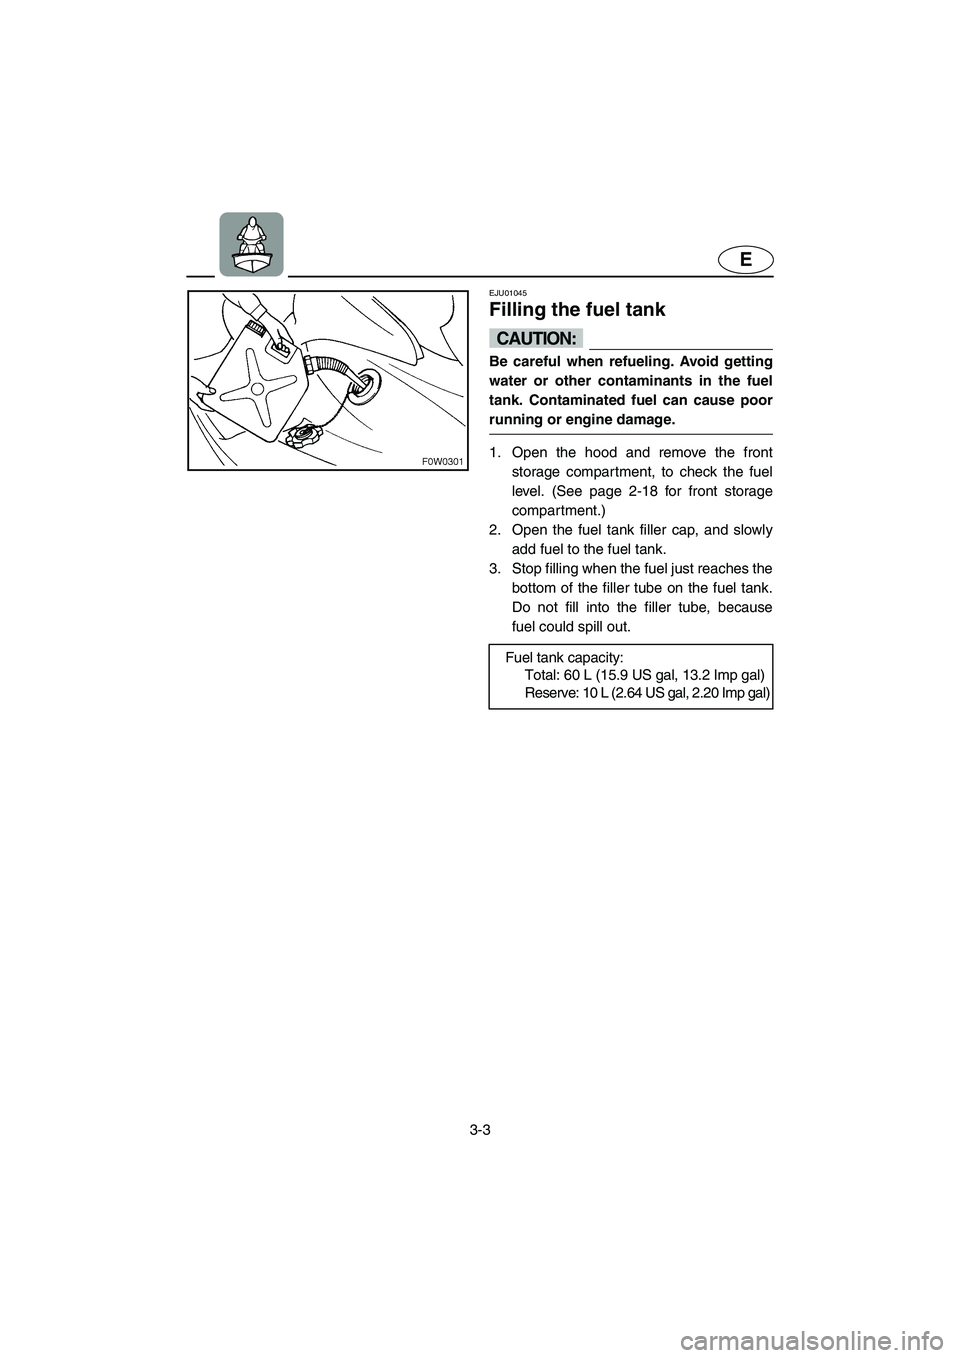 YAMAHA GP800R 2002  Owners Manual 3-3
E
EJU01045 
Filling the fuel tank  
CAUTION:@ Be careful when refueling. Avoid getting
water or other contaminants in the fuel
tank. Contaminated fuel can cause poor
running or engine damage. 
@ 
